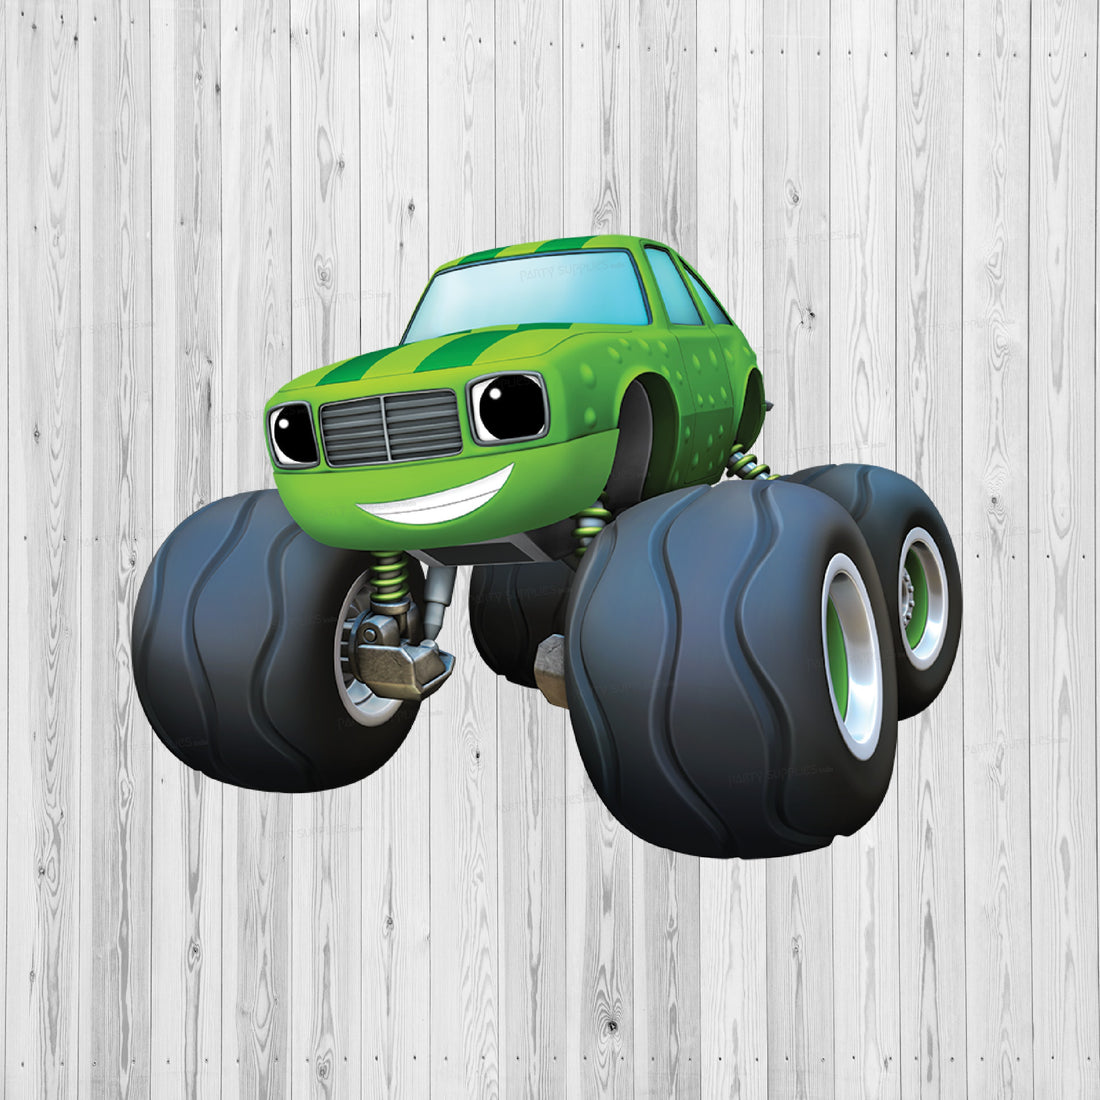 PSI Blaze and the Monster Machines Theme Cutout - 06